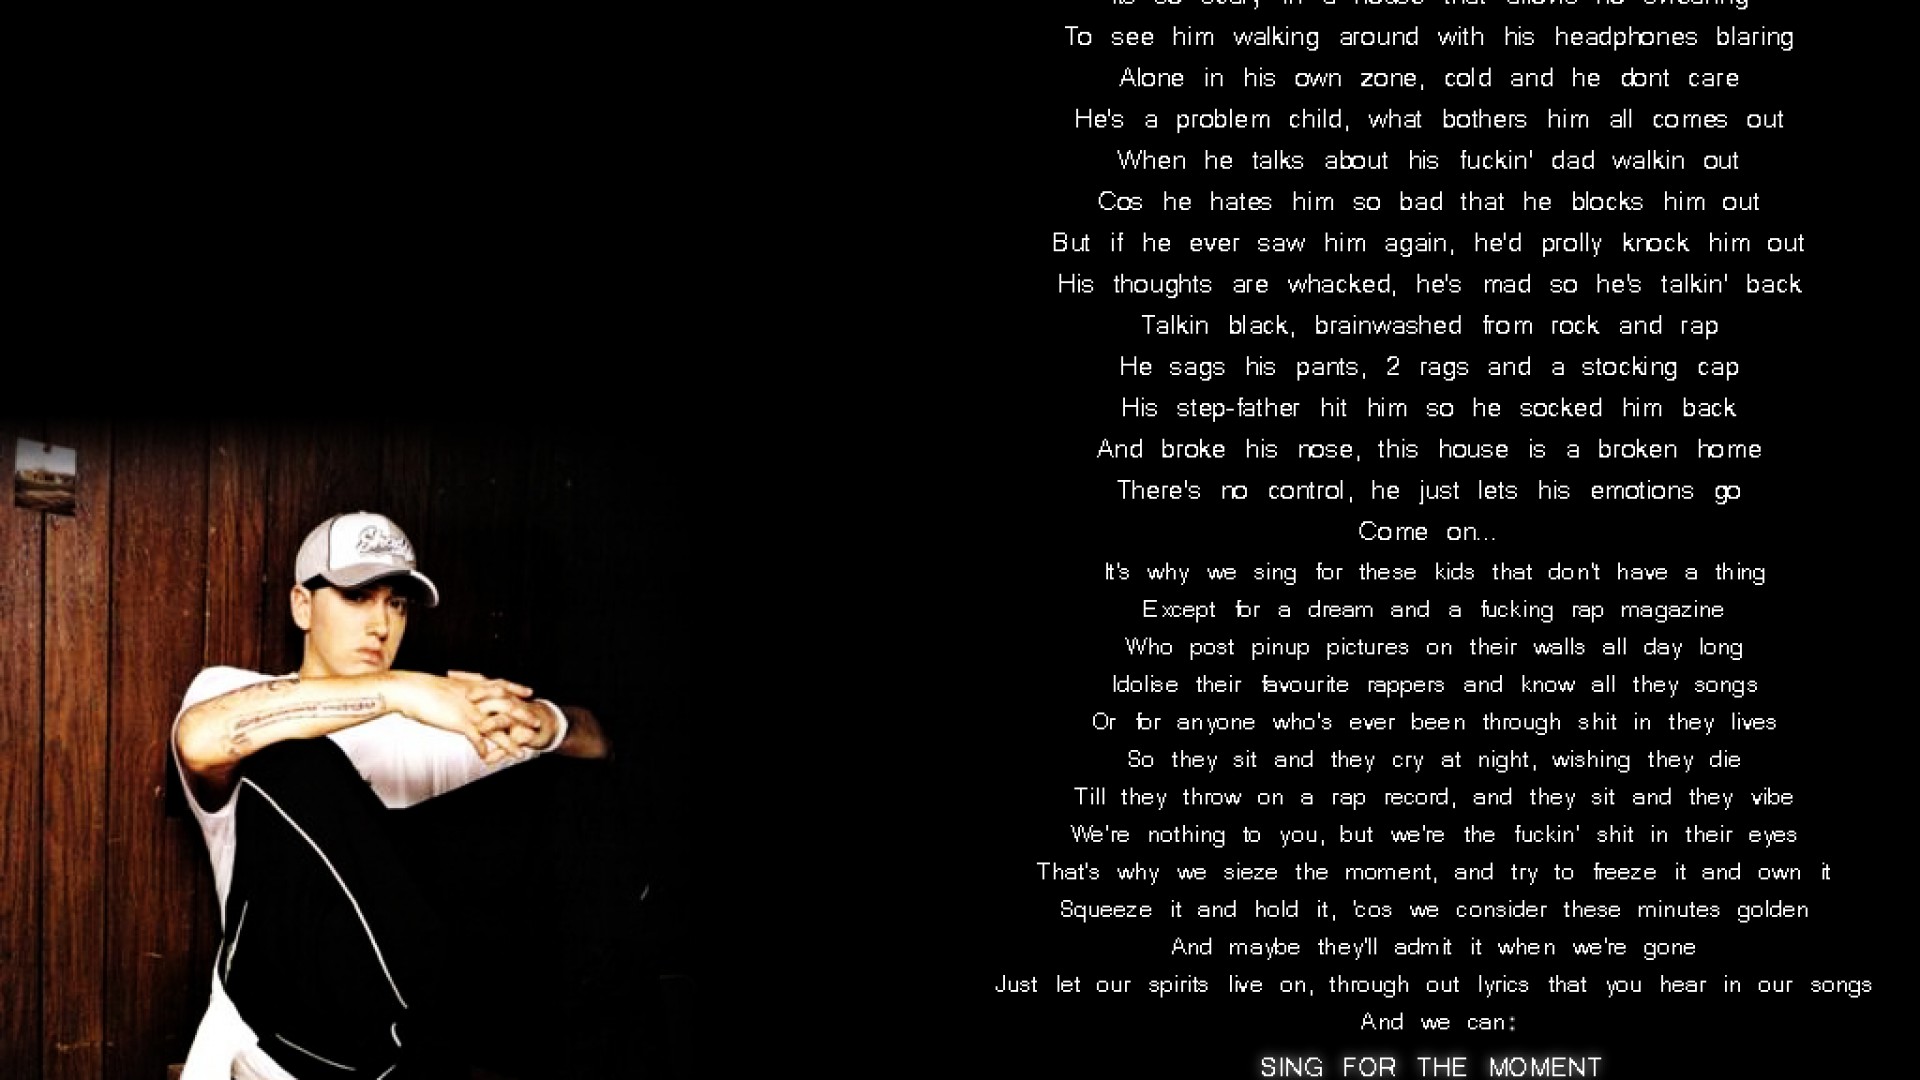 Eminem Image Sing For The Moment HD Wallpaper And Sing For The Moment Quotes Wallpaper & Background Download